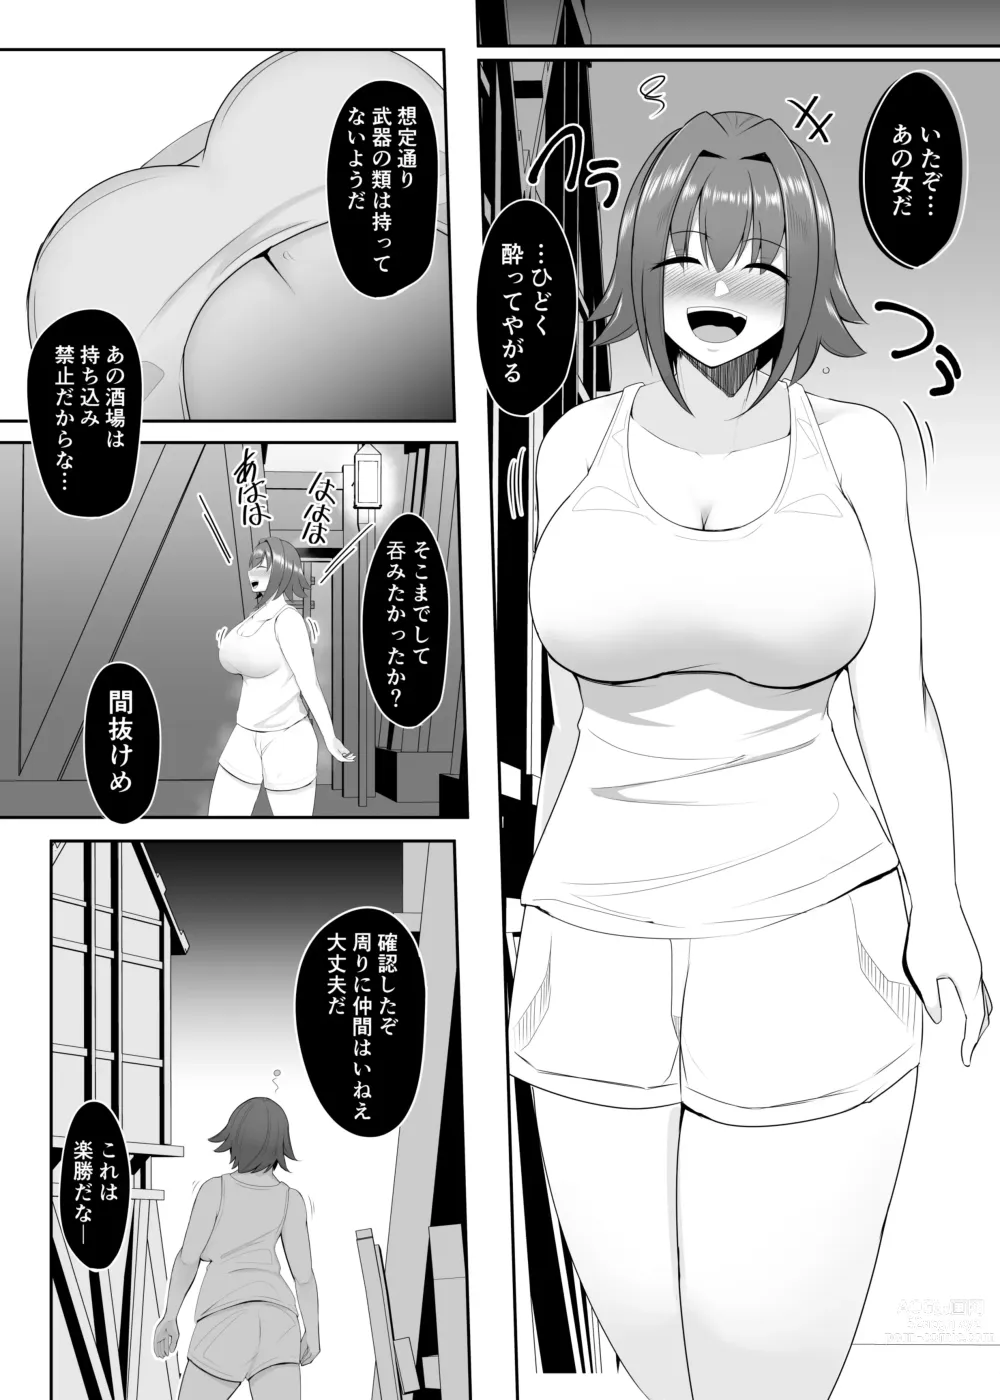 Page 7 of doujinshi Doll Turning Collar - Female Warrior